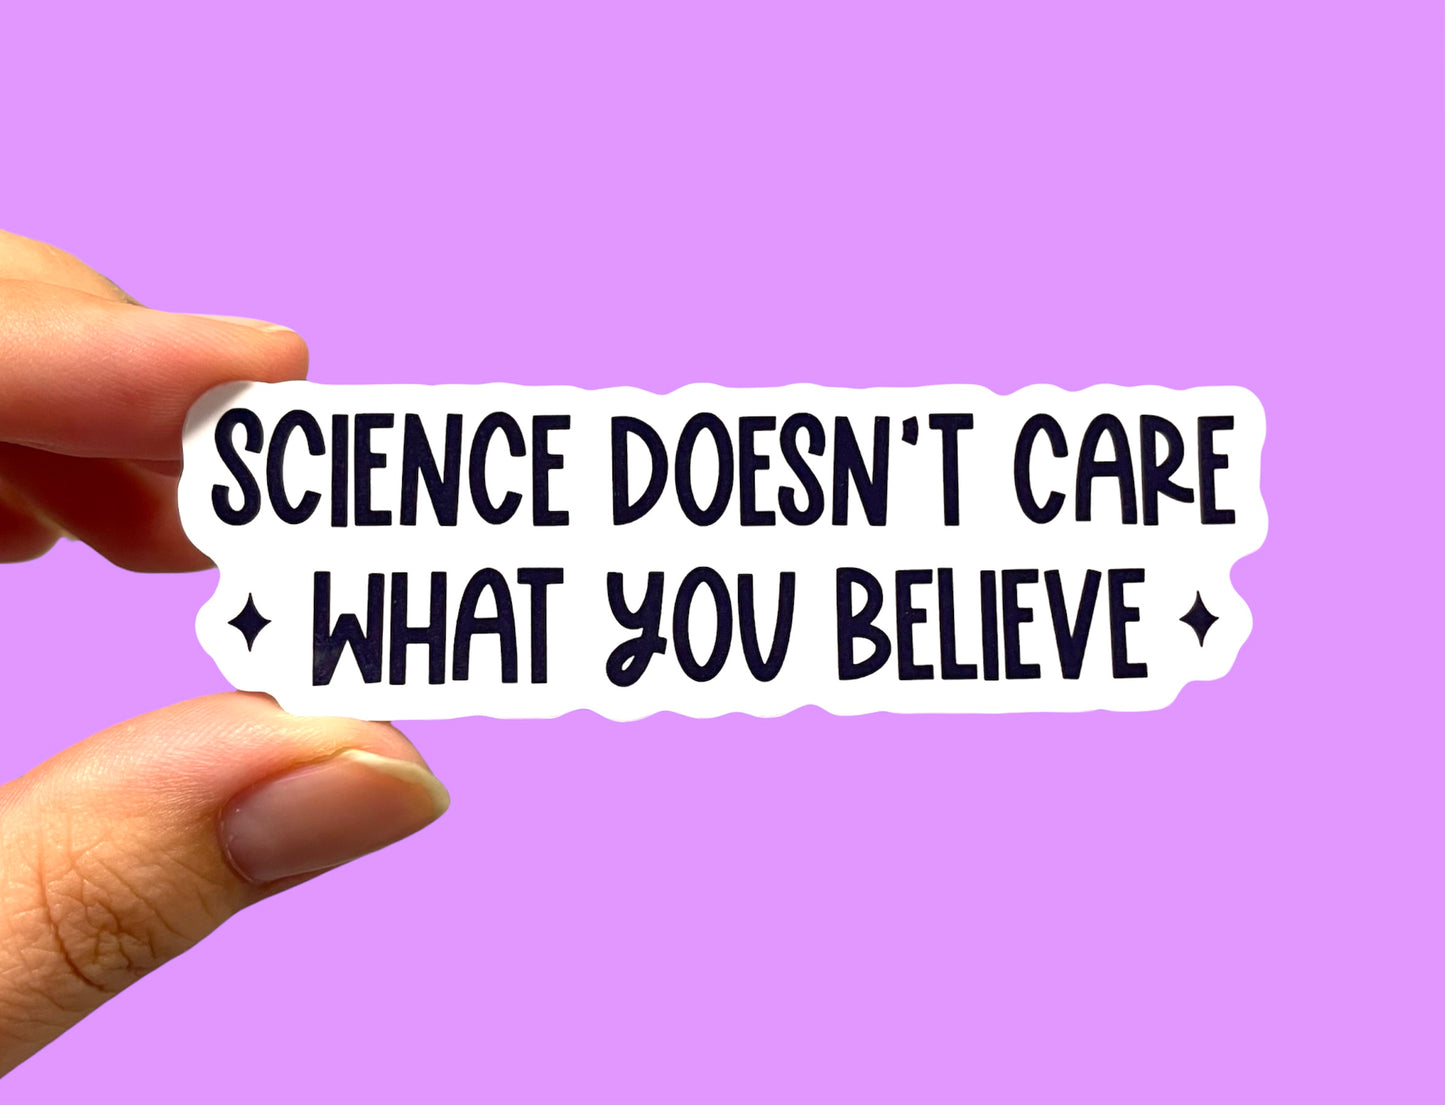 Science doesn’t care what you believe